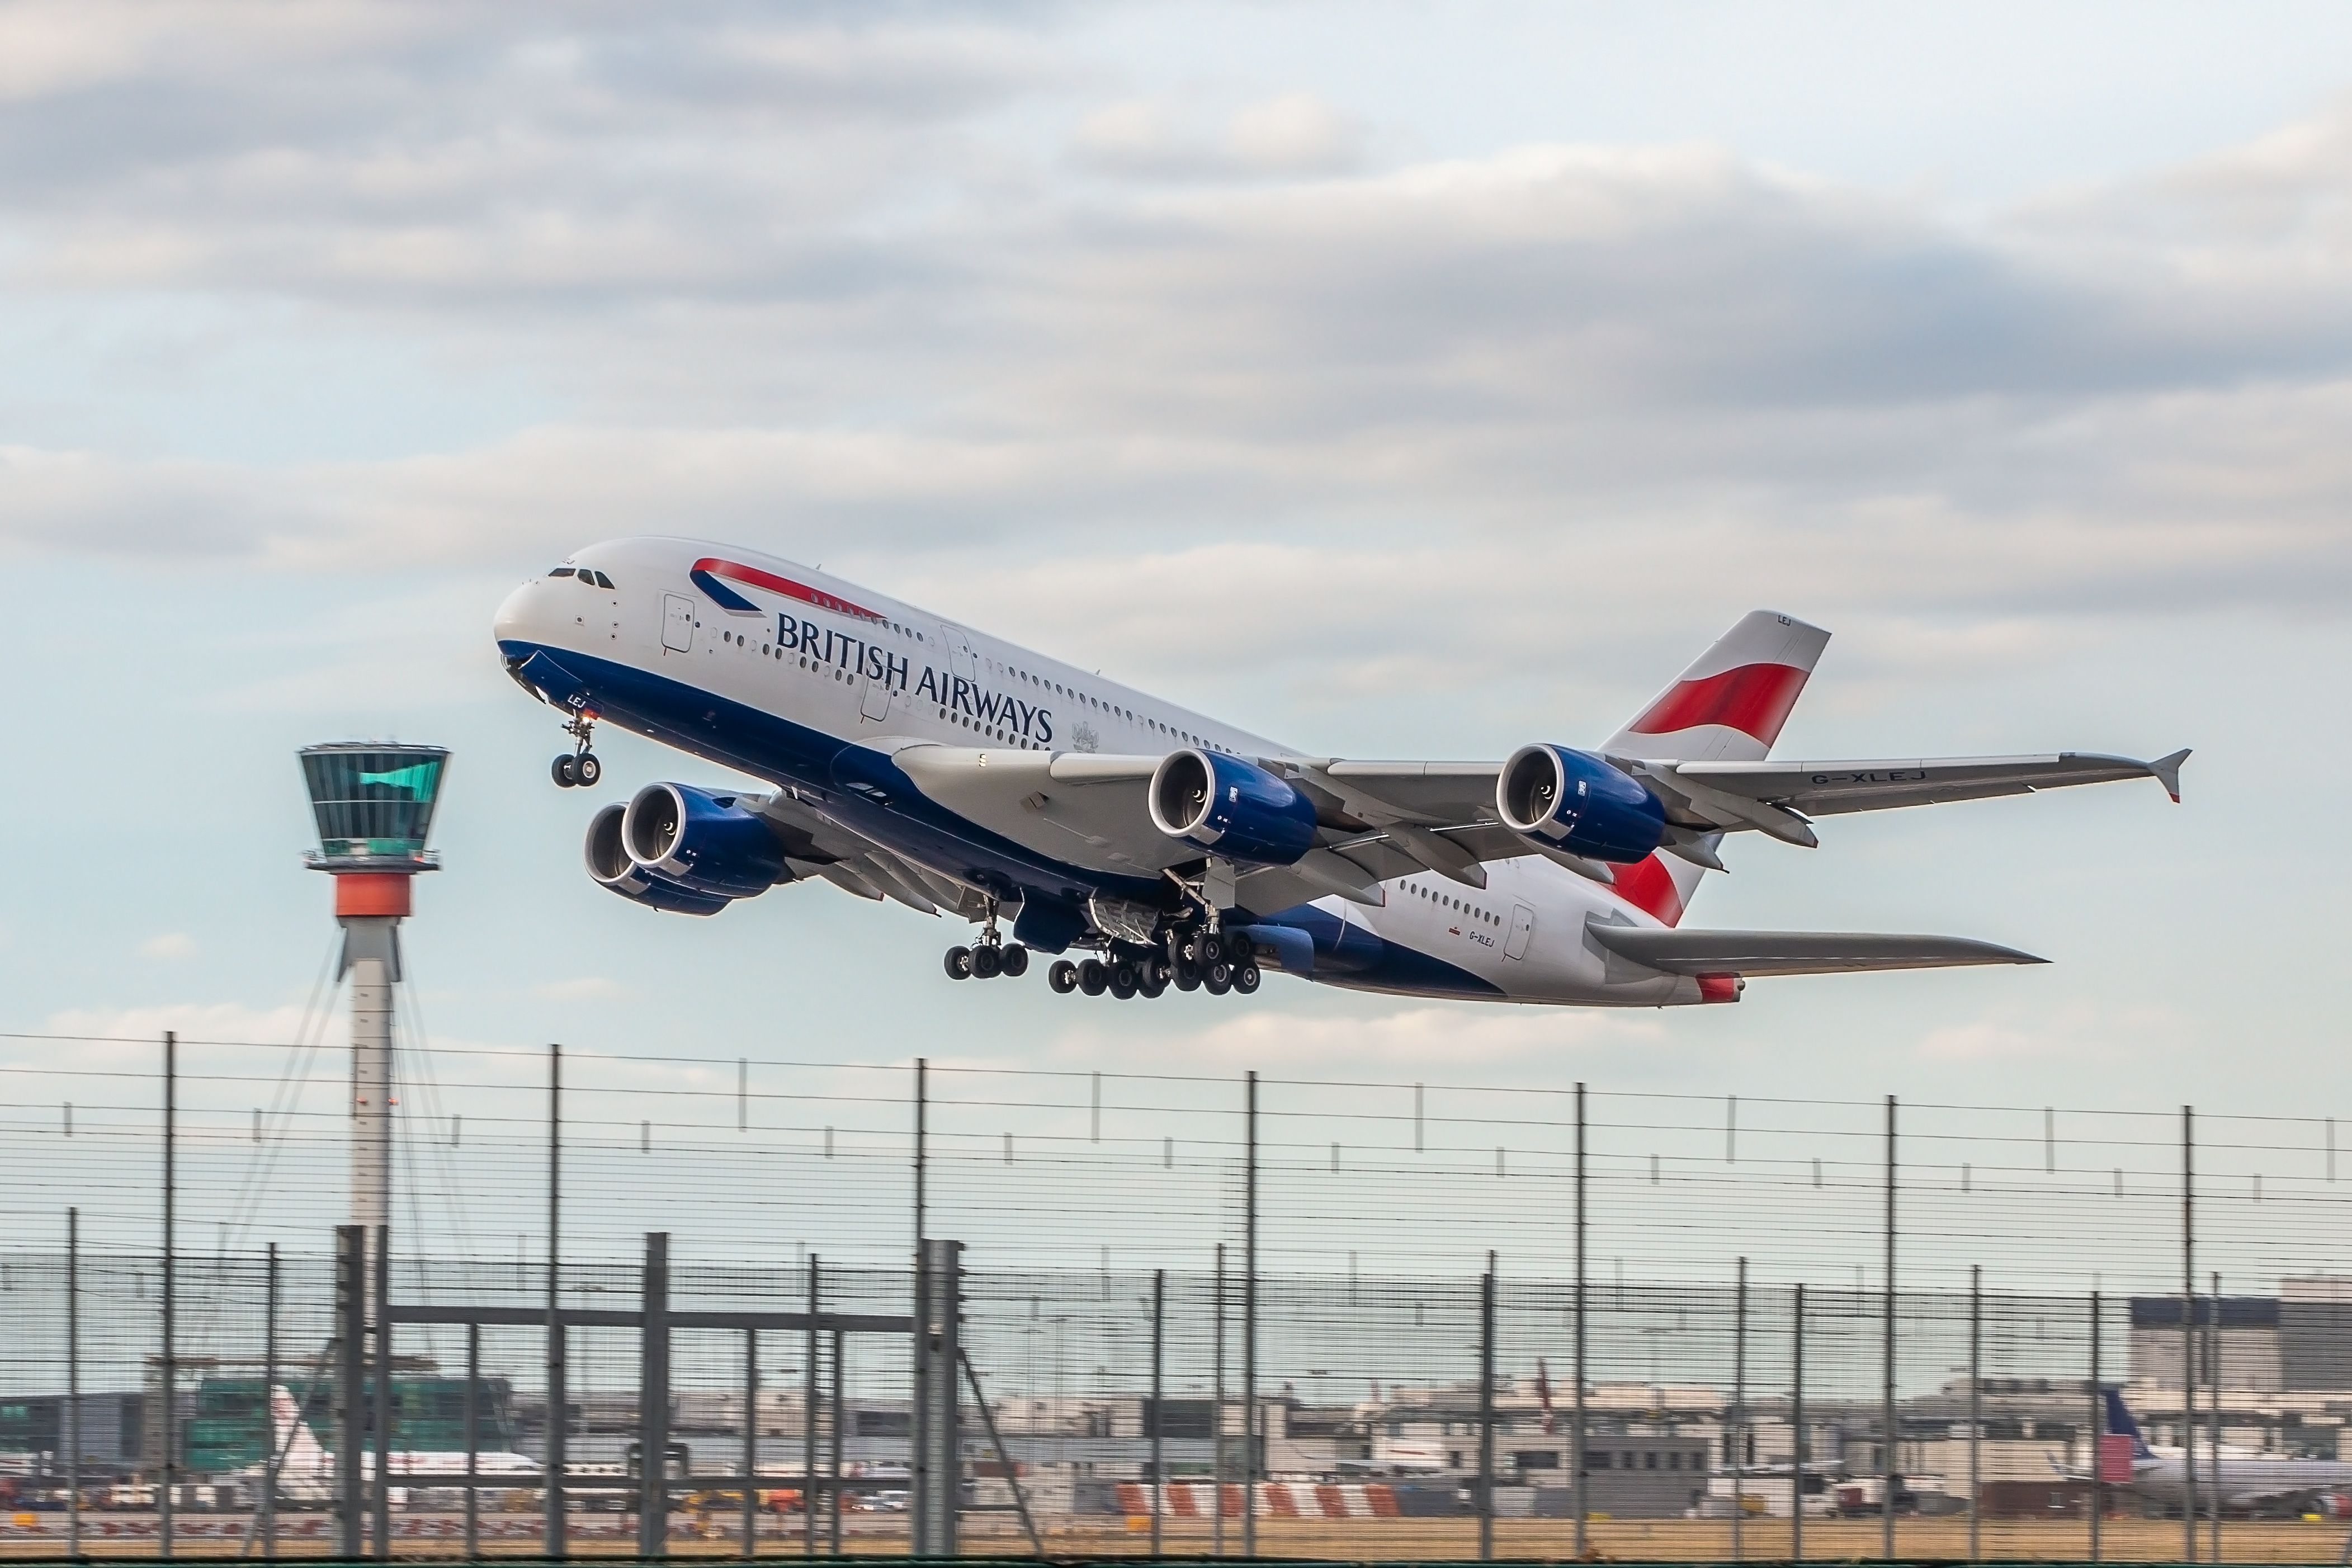 A British Airways Airbus A380 Taking off from London Heathrow Airport.